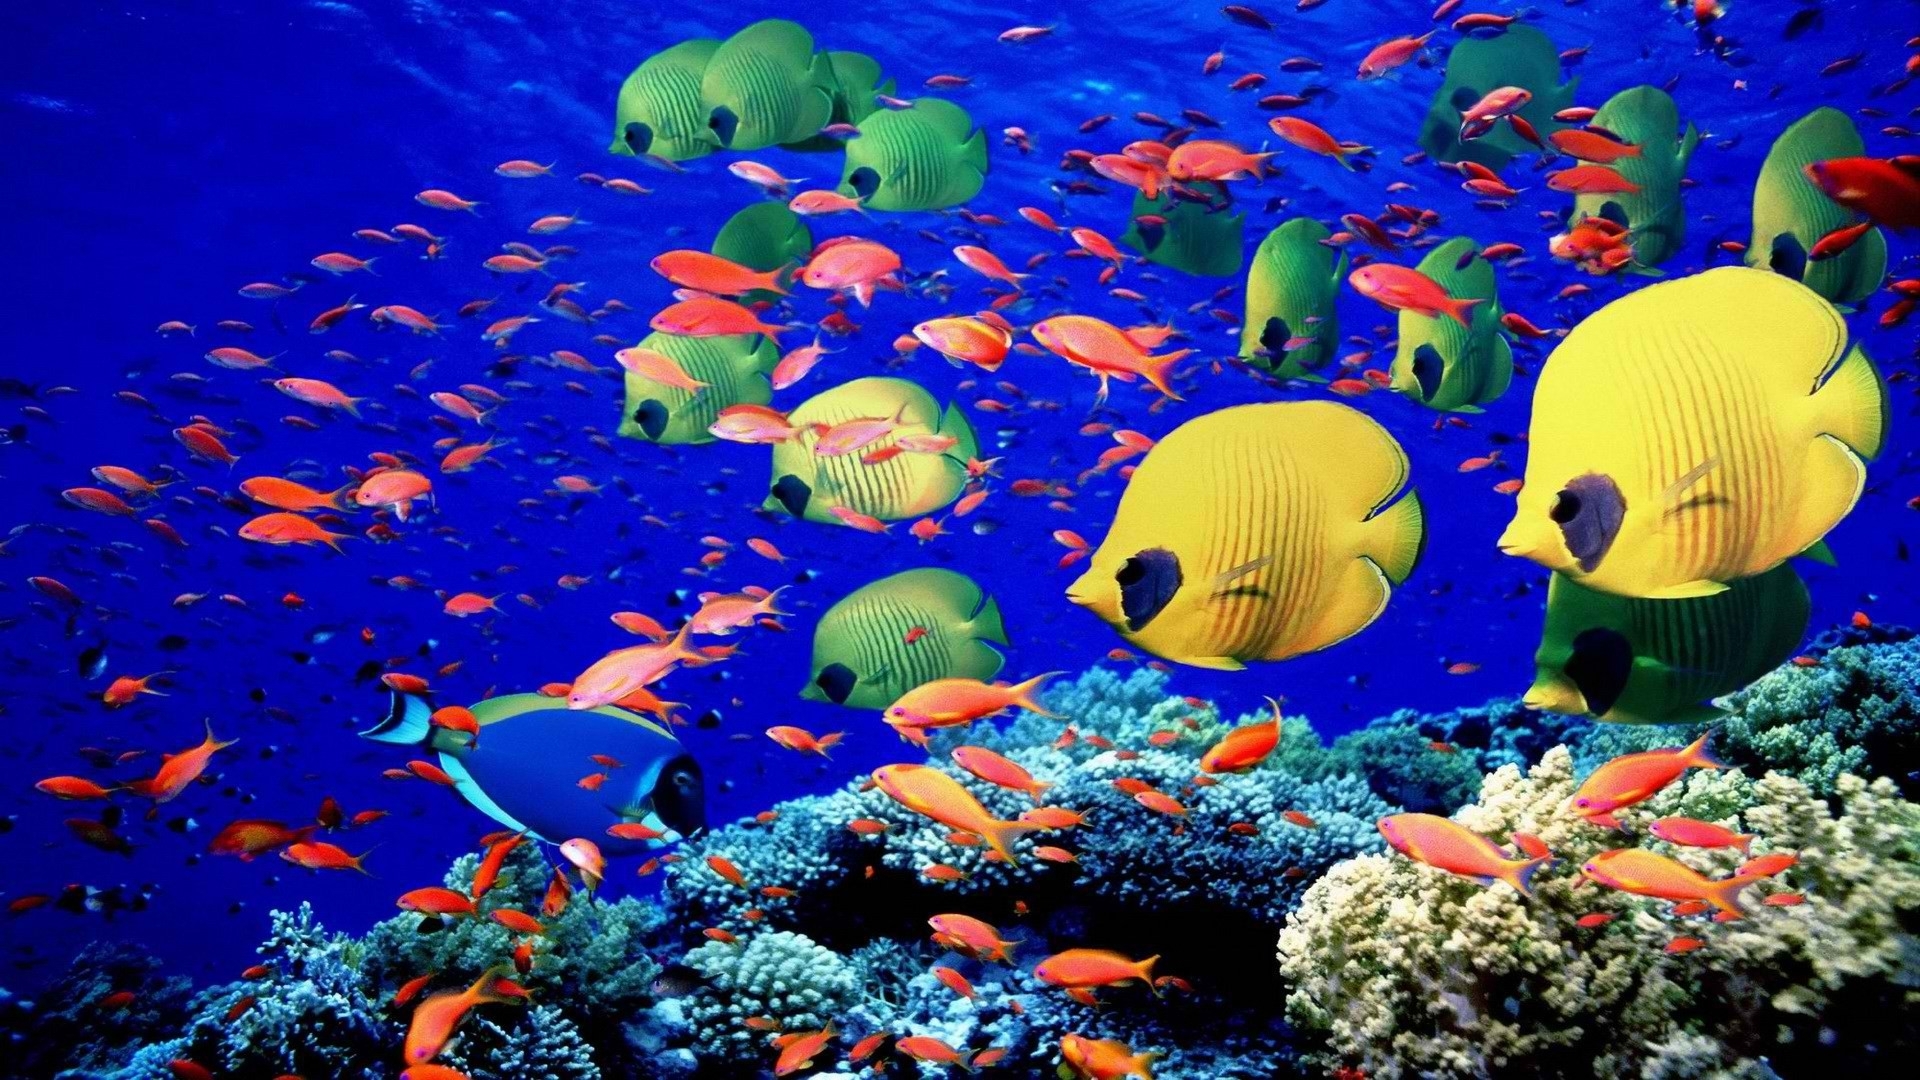 Colorful Coral Reef Wallpaper 1920x1080